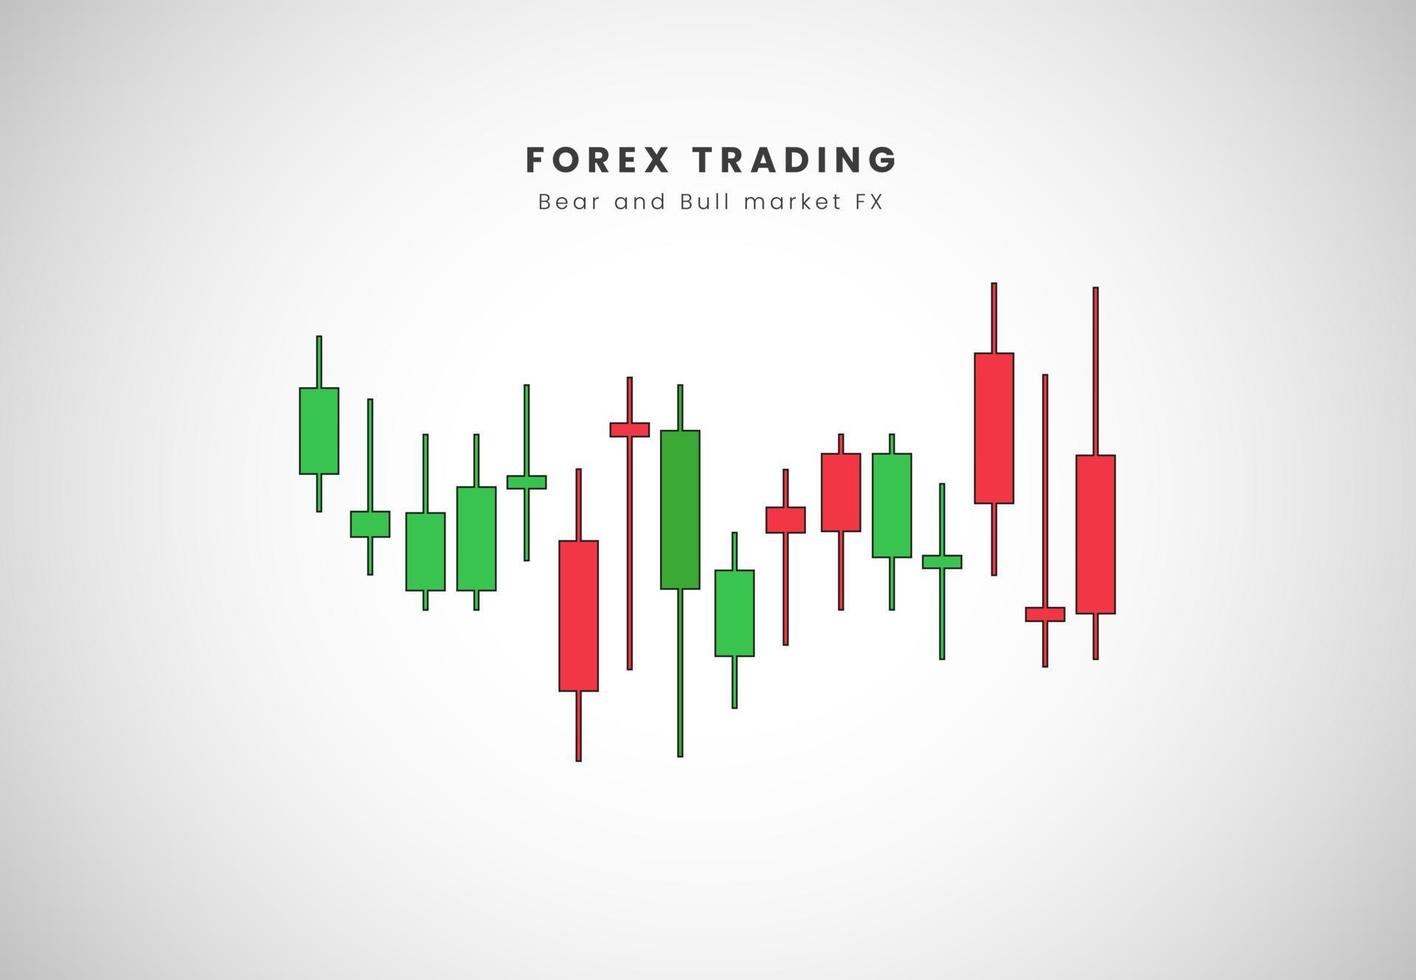 Trending of Forex price action candles for red and green, Forex Trading charts in Signals vector illustration. Buy and sell indicators for forex market